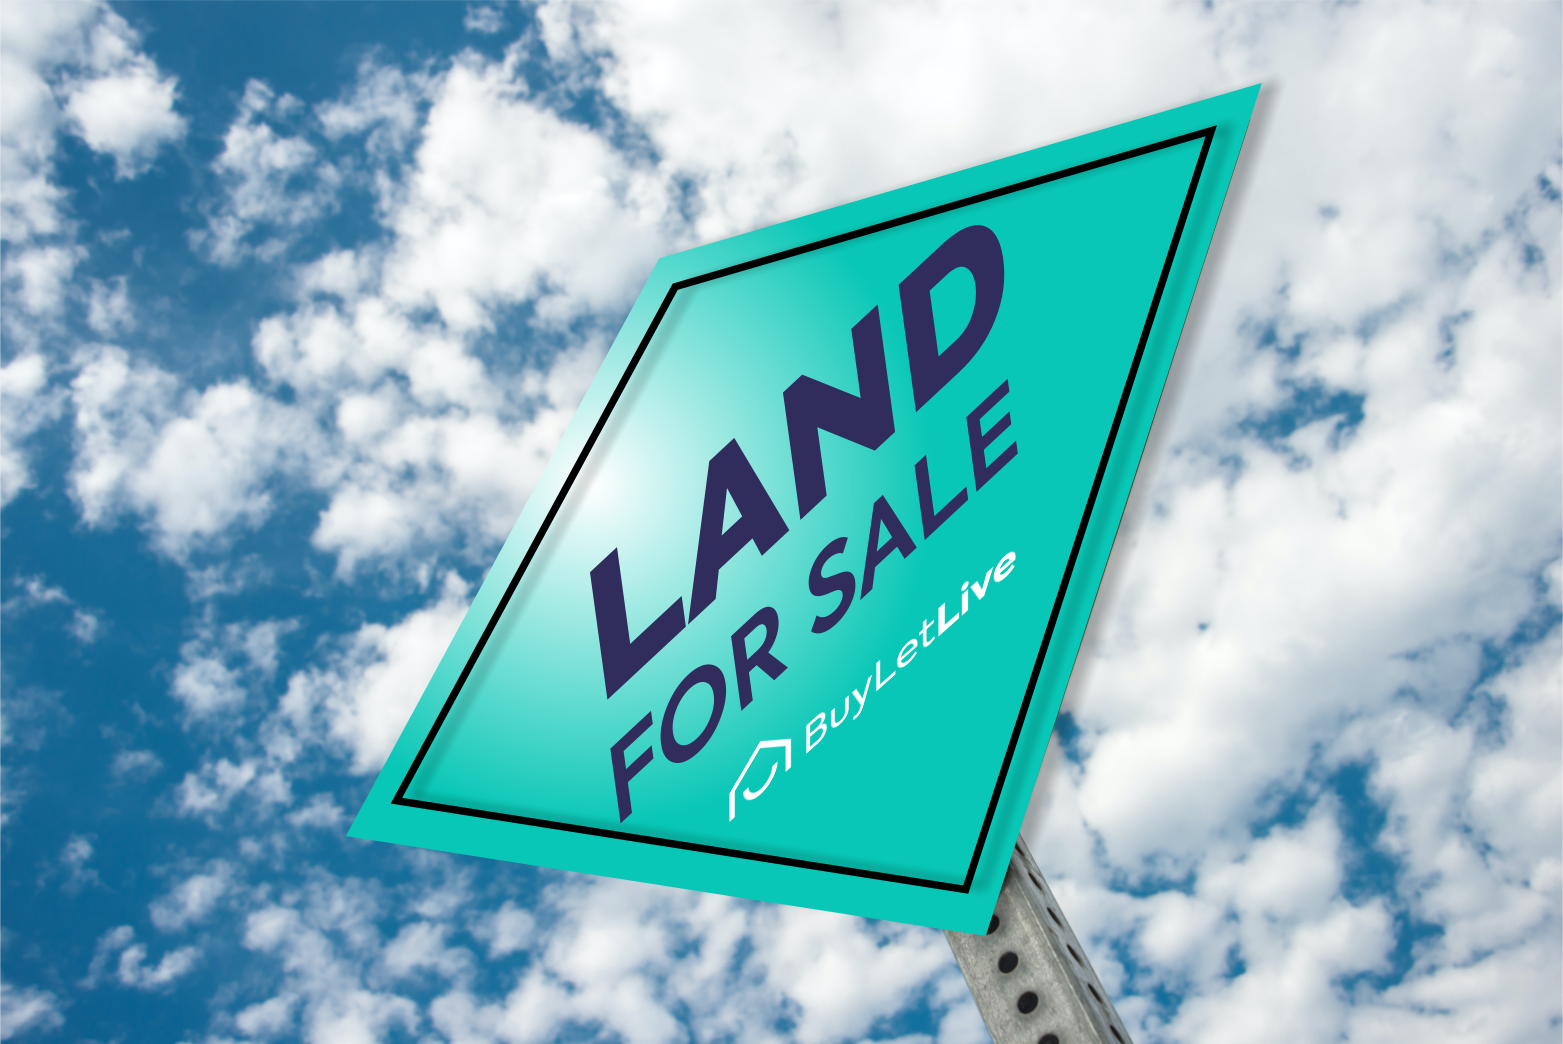 6 Plots Of Dry And Genuine Land For Sale